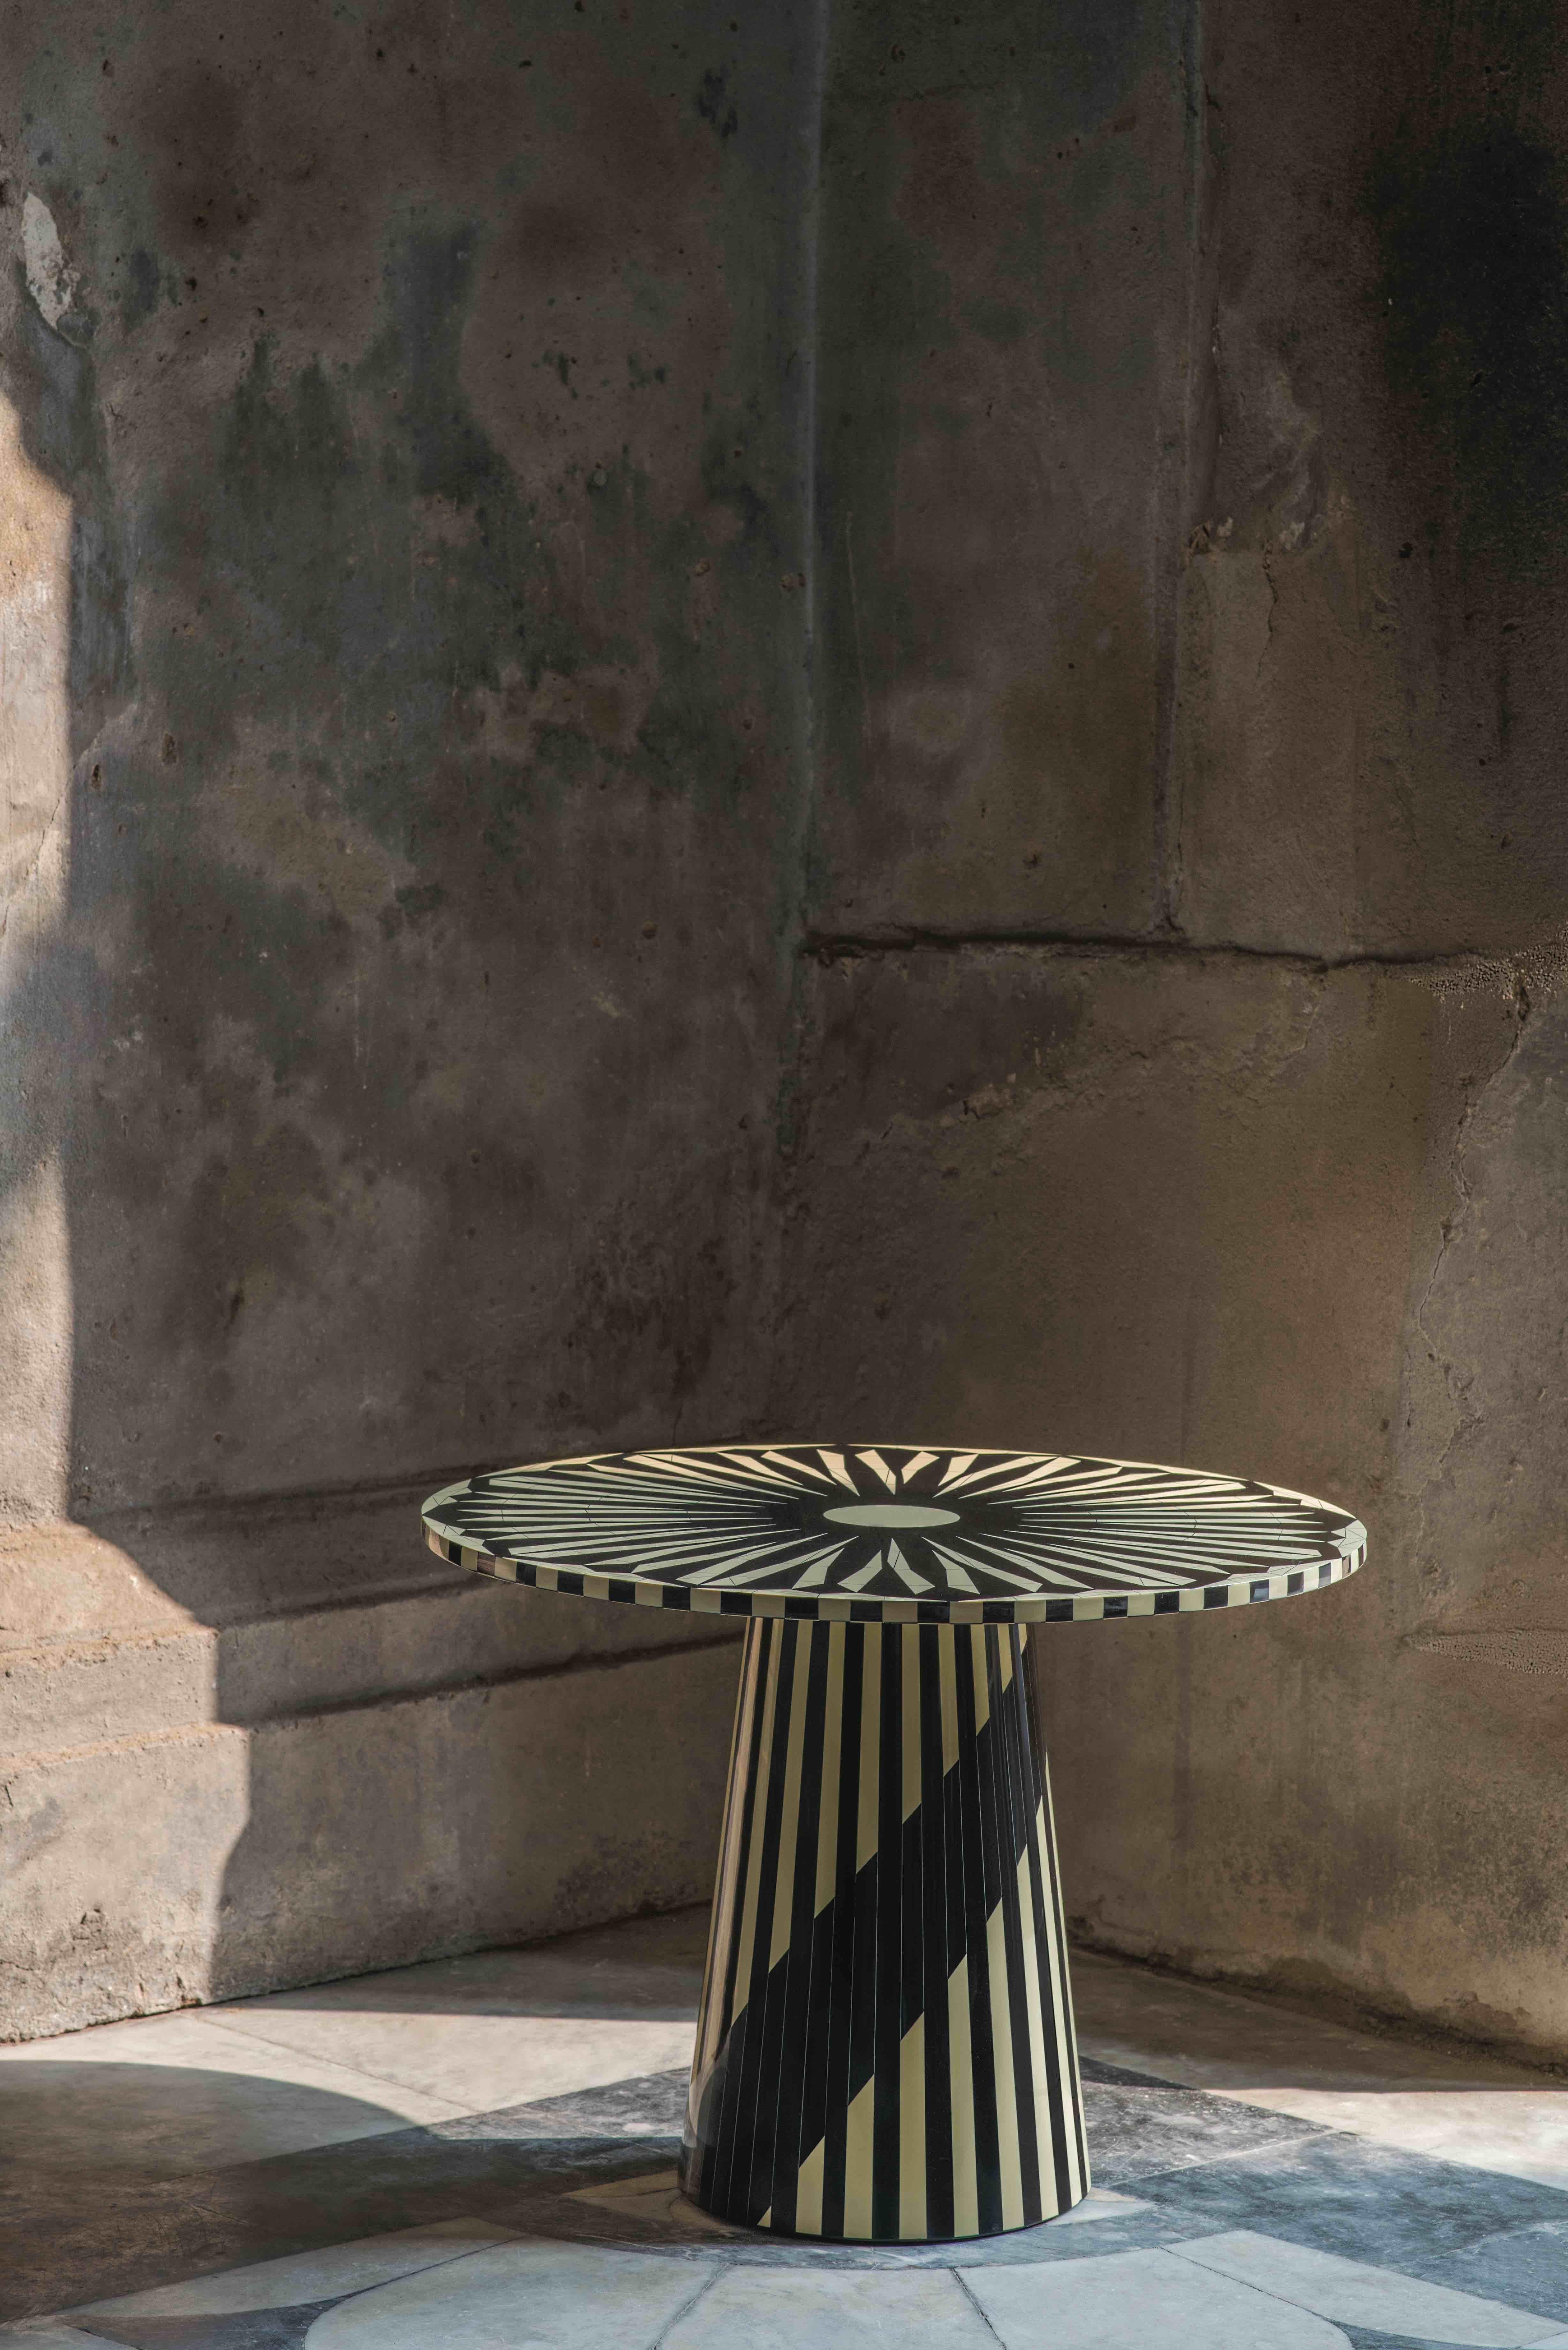 The Circus Black and White Side Table by Matteo Cibic is a gorgeous versatile small round table.

India's handicrafts are as multifarious as its cultures, and as rich as its history. The art of bone and horn inlay is omnipresent here. Artisans from